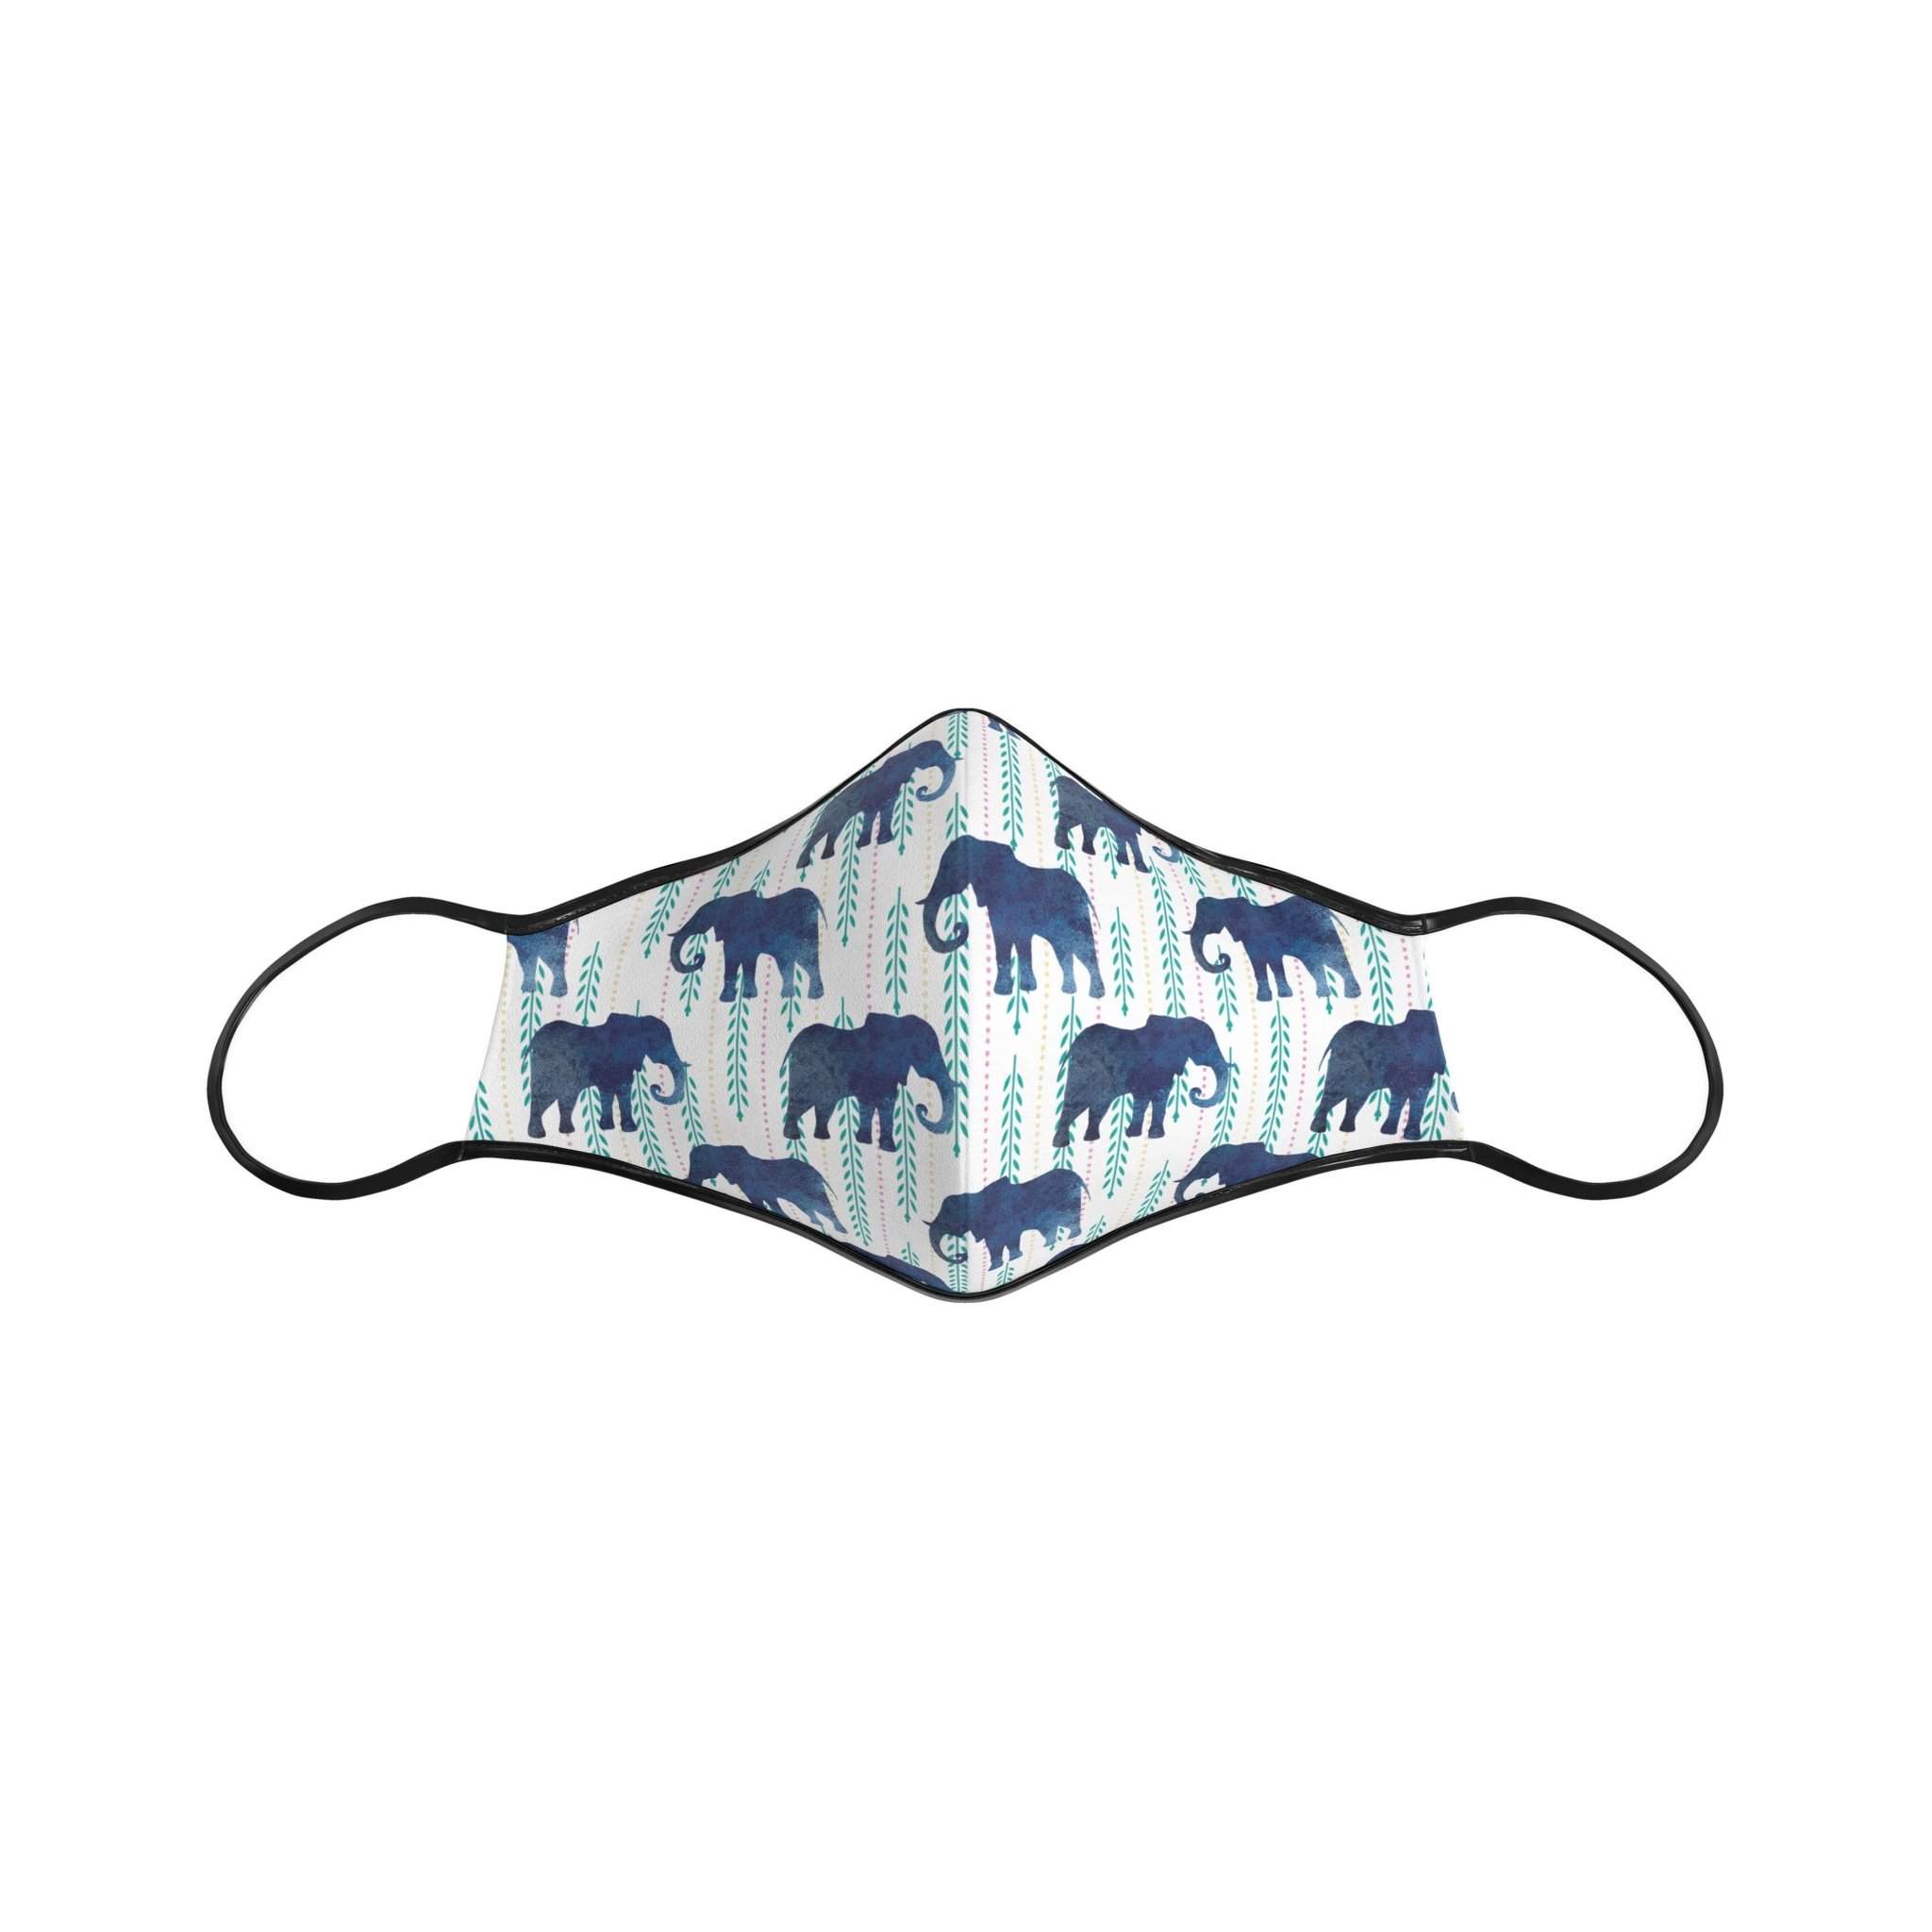 FACE MASK - Blue Elepanta Face Masks - Buy Today Elephant Pants Jewelry And Bohemian Clothes Handmade In Thailand Help To Save The Elephants FairTrade And Vegan